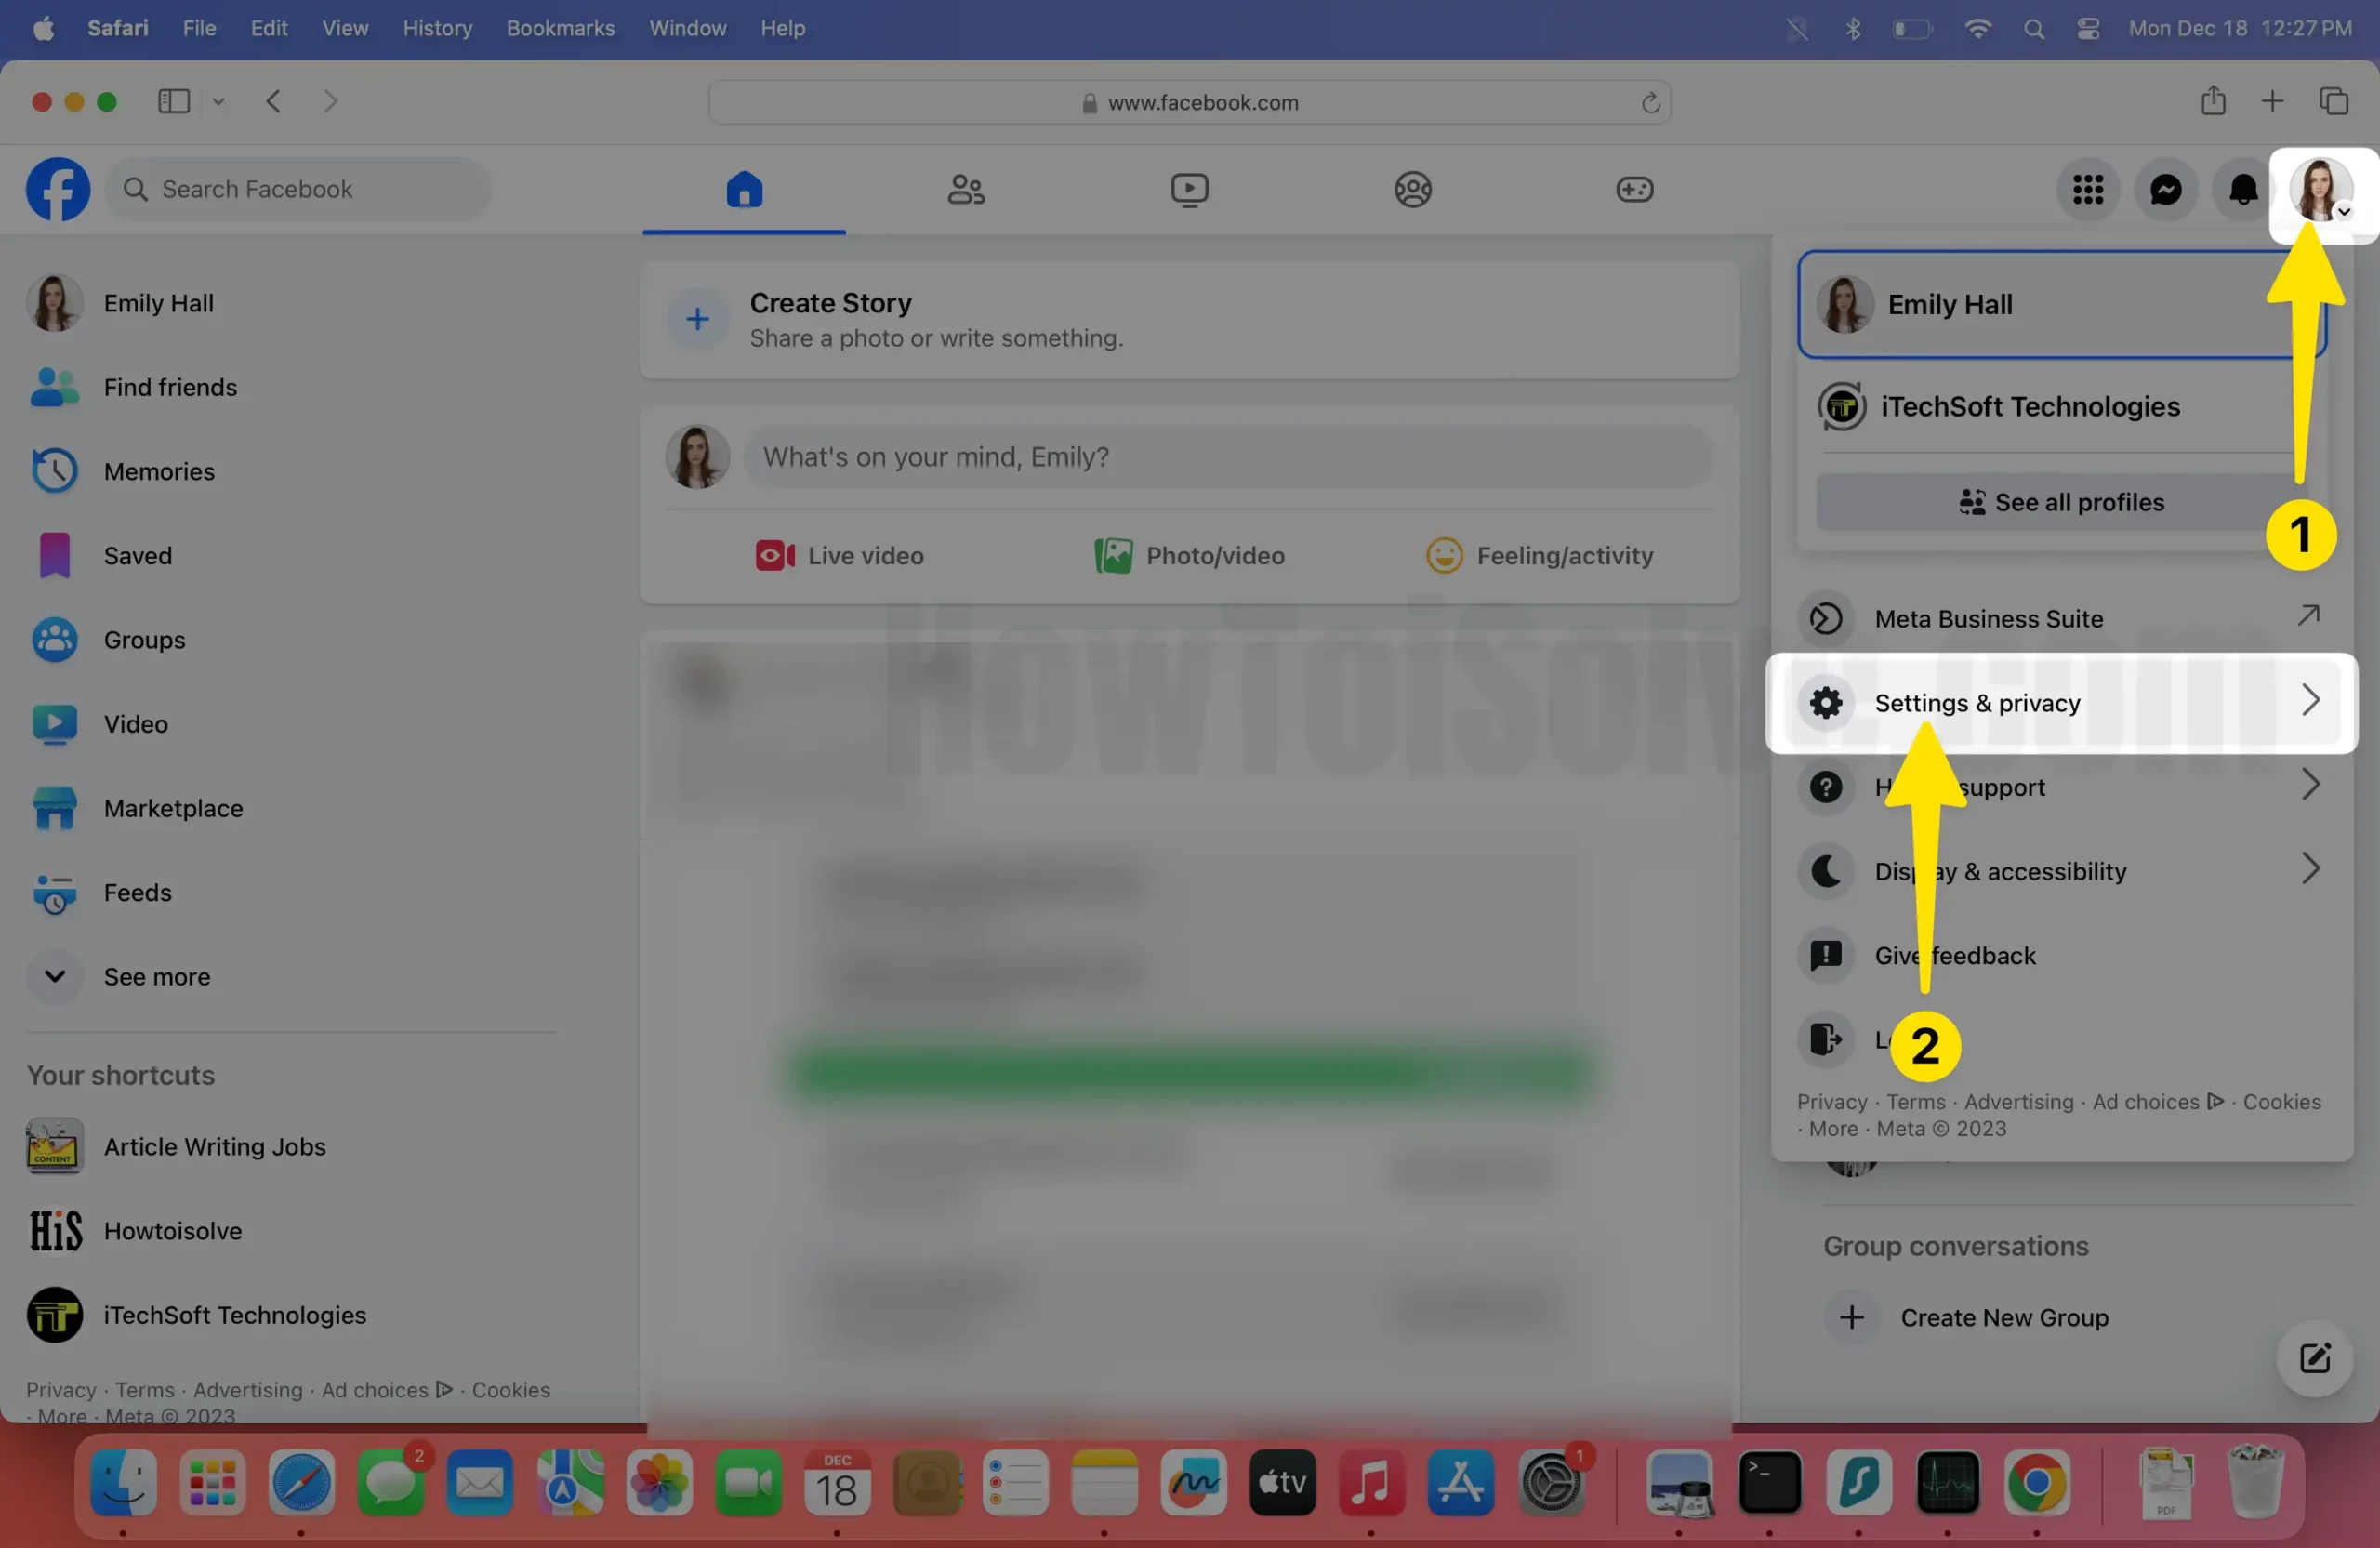 Open Facebook click profile icon then settings & privacy on mac